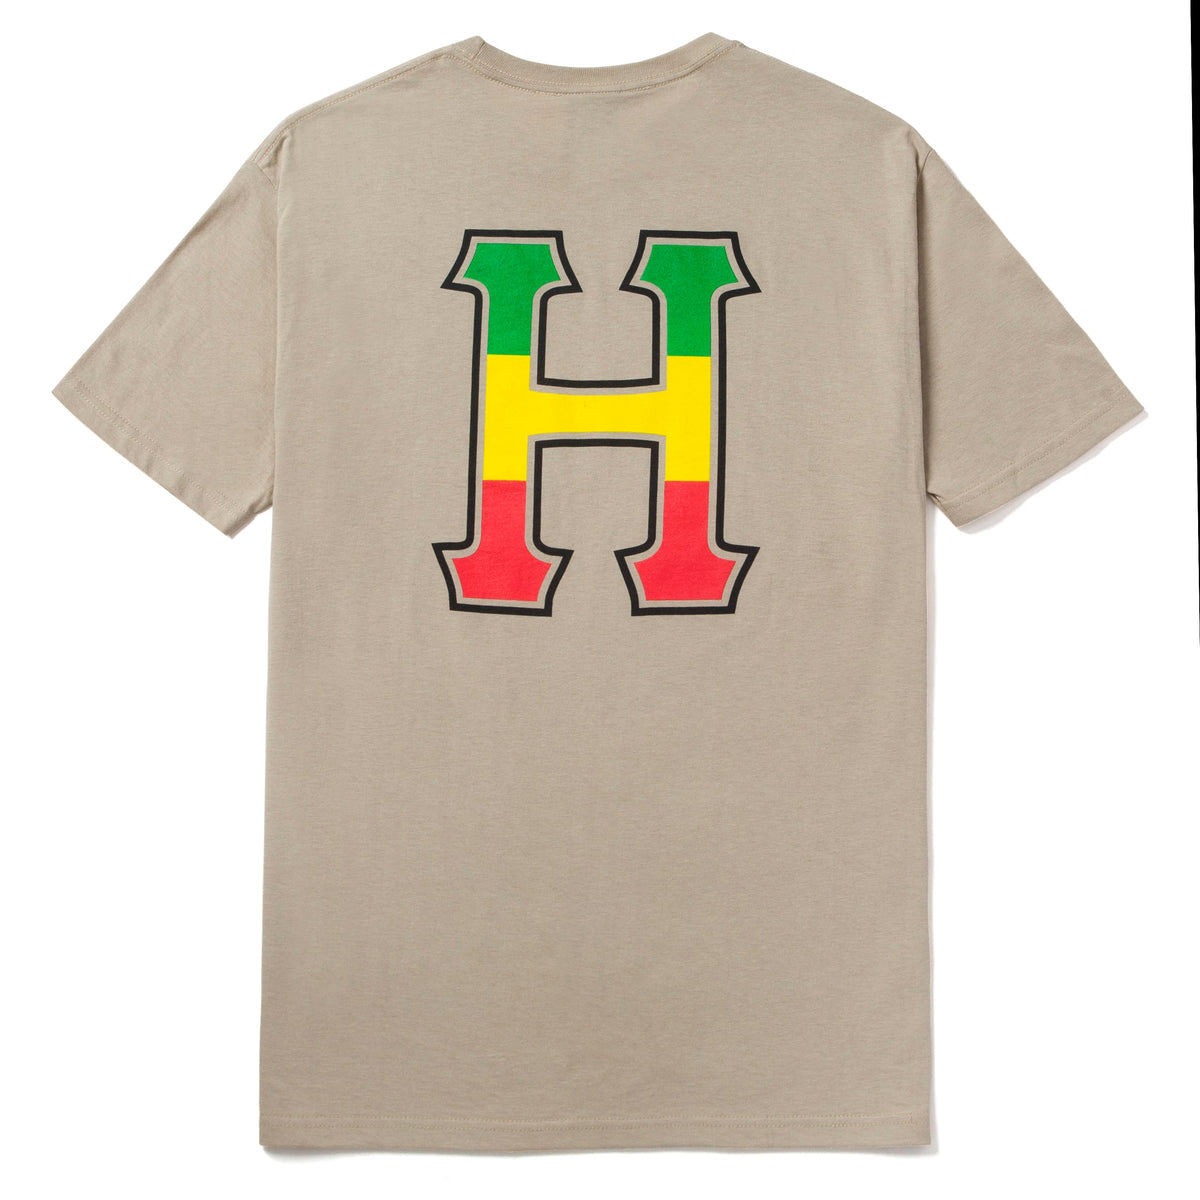 HUF Righteous T-Shirt - Sand